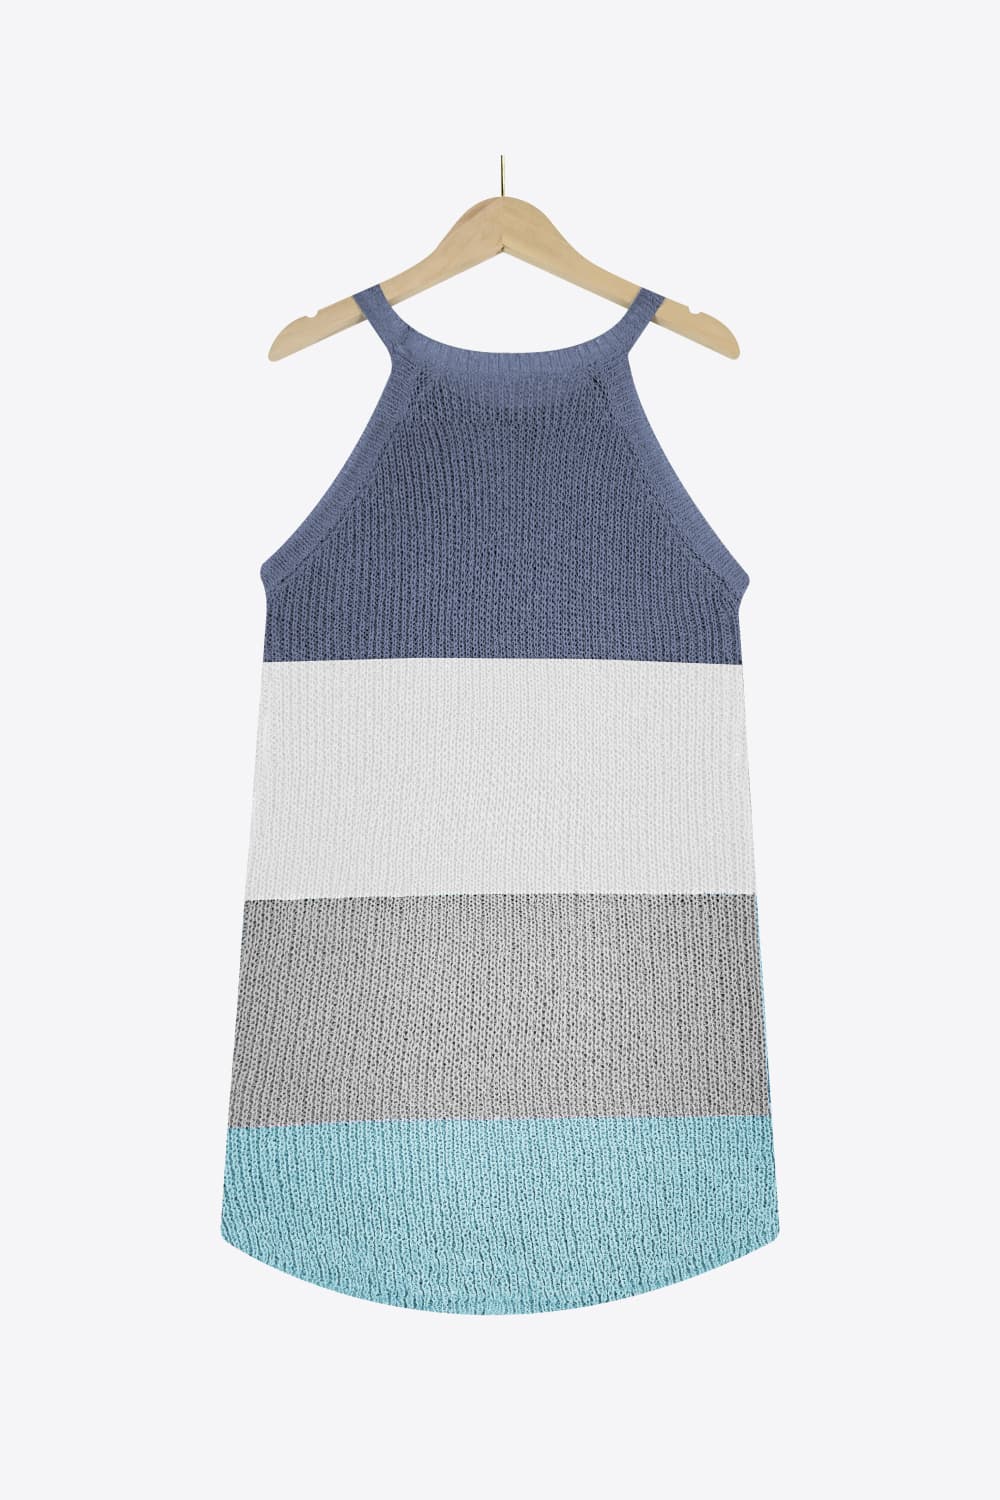 a blue and white tank top hanging on a hanger